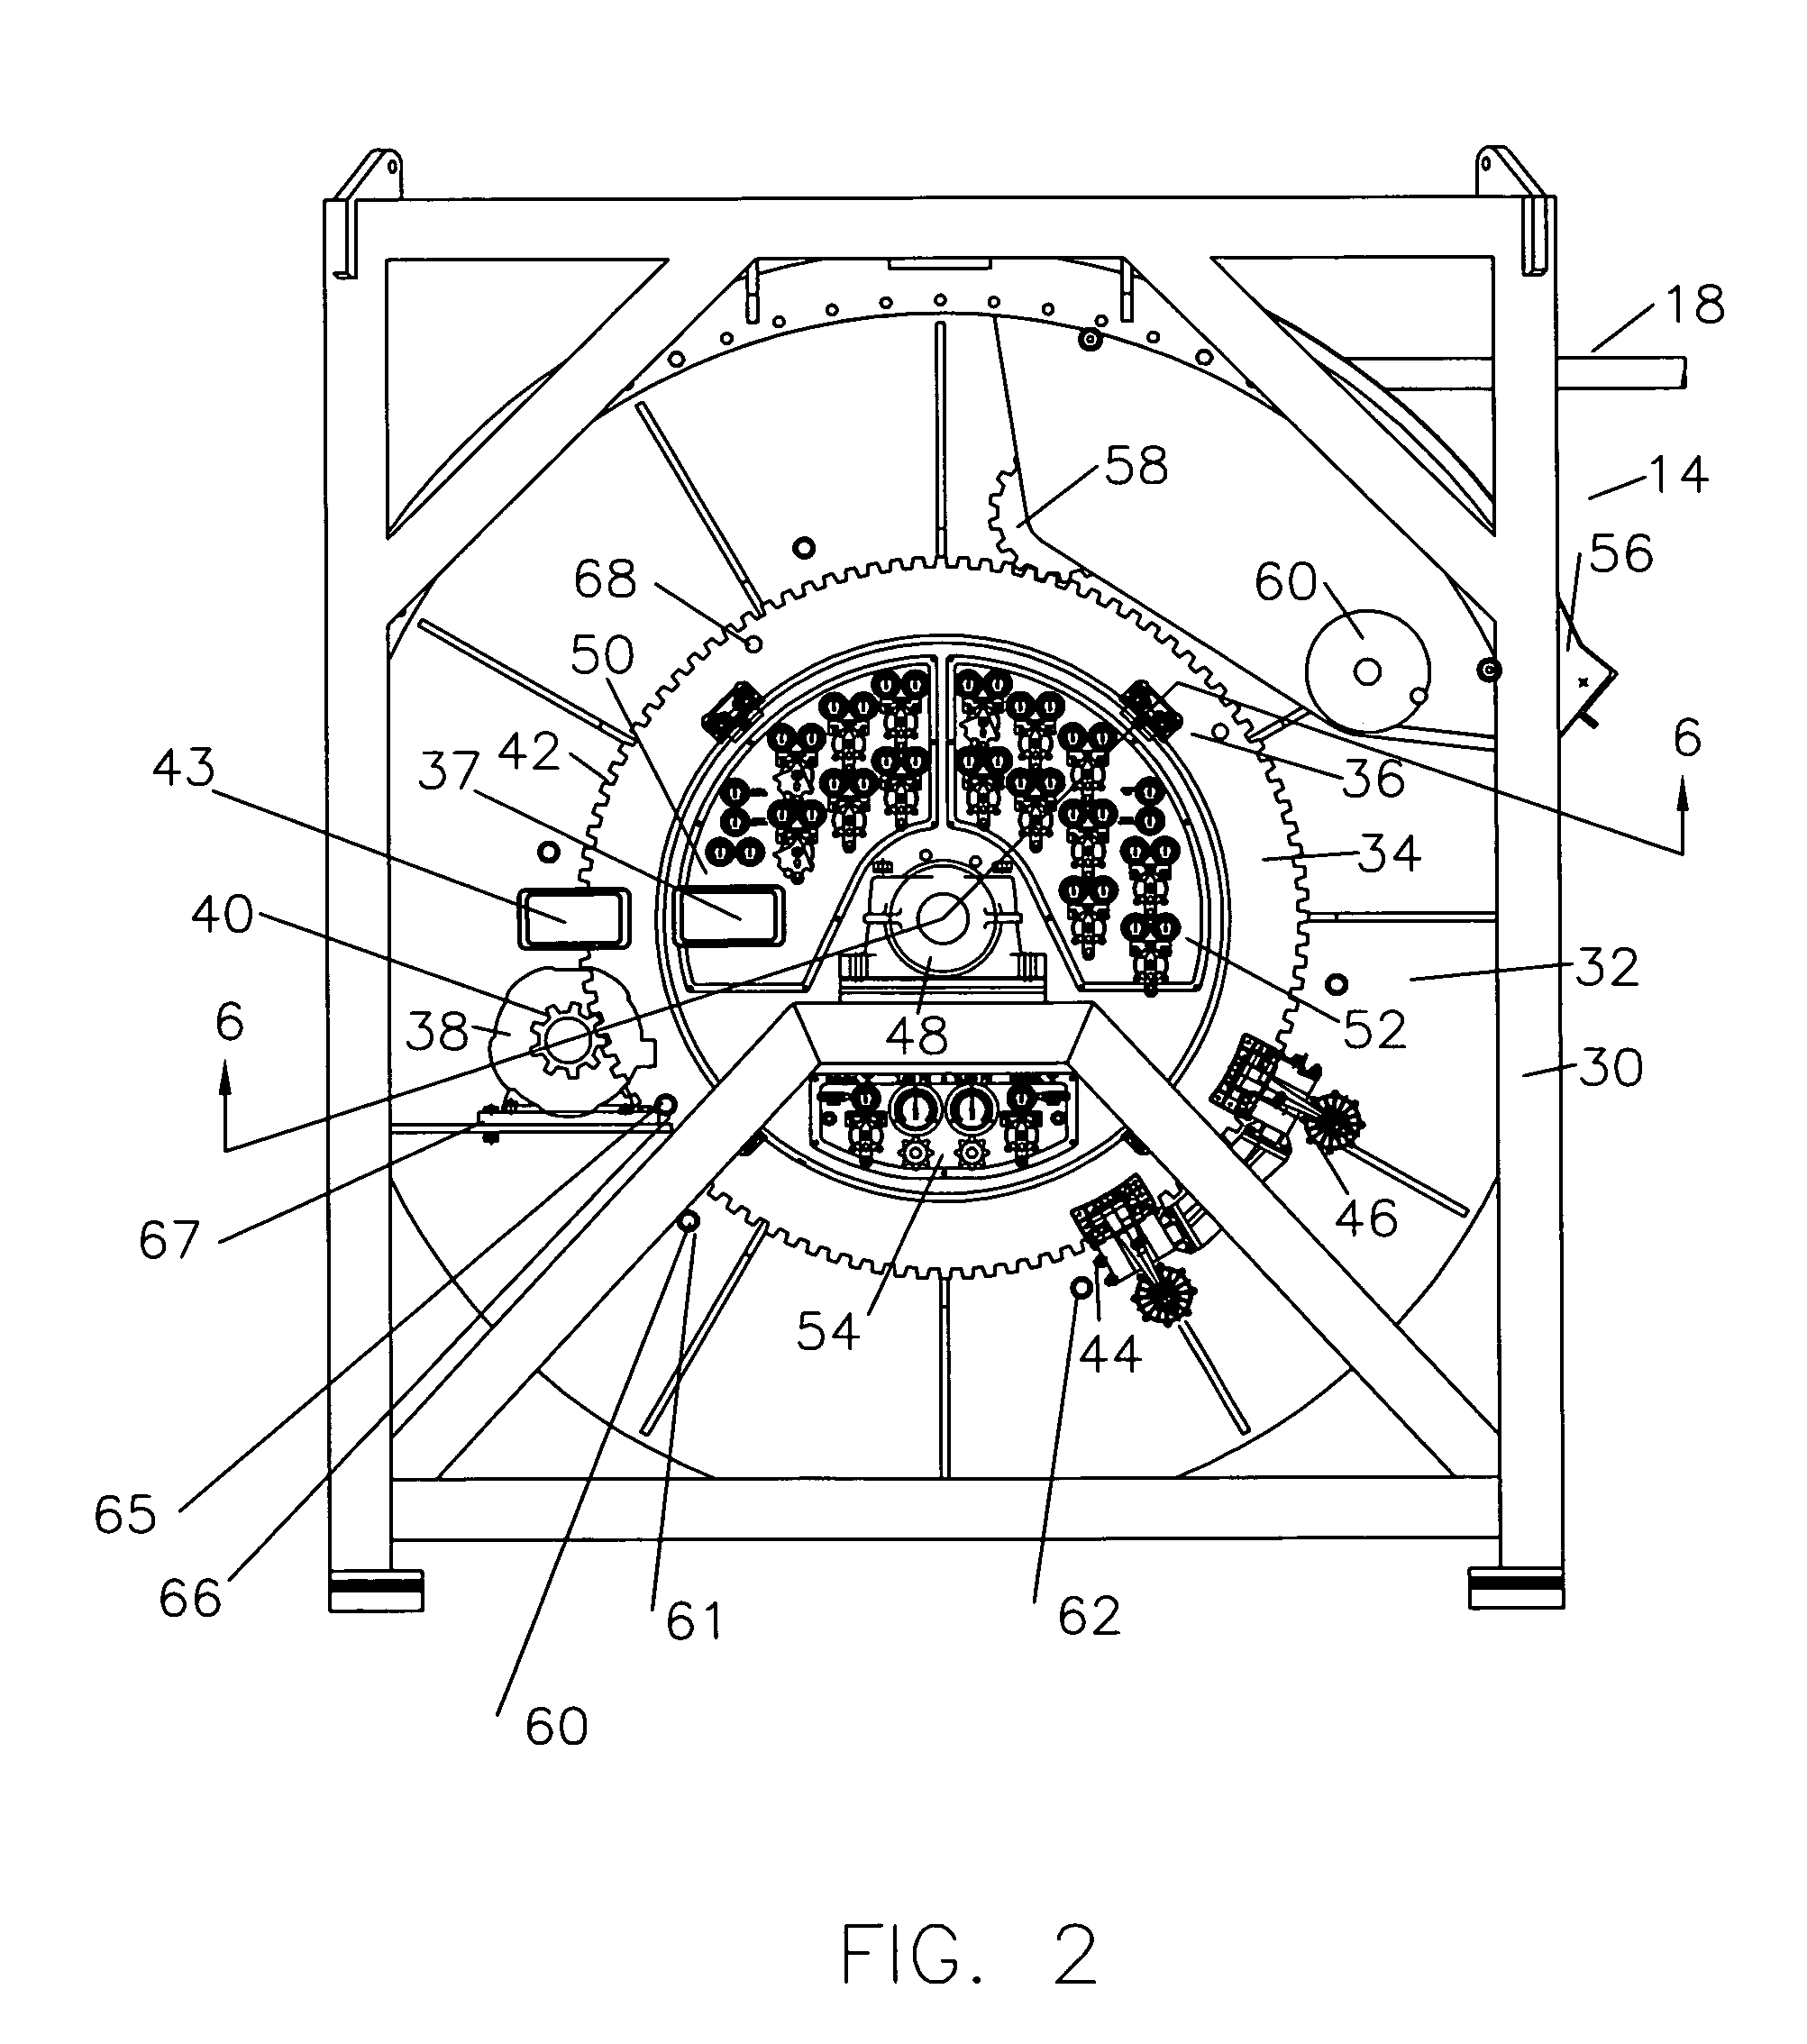 Method for automatic slip clutch tension on a reel